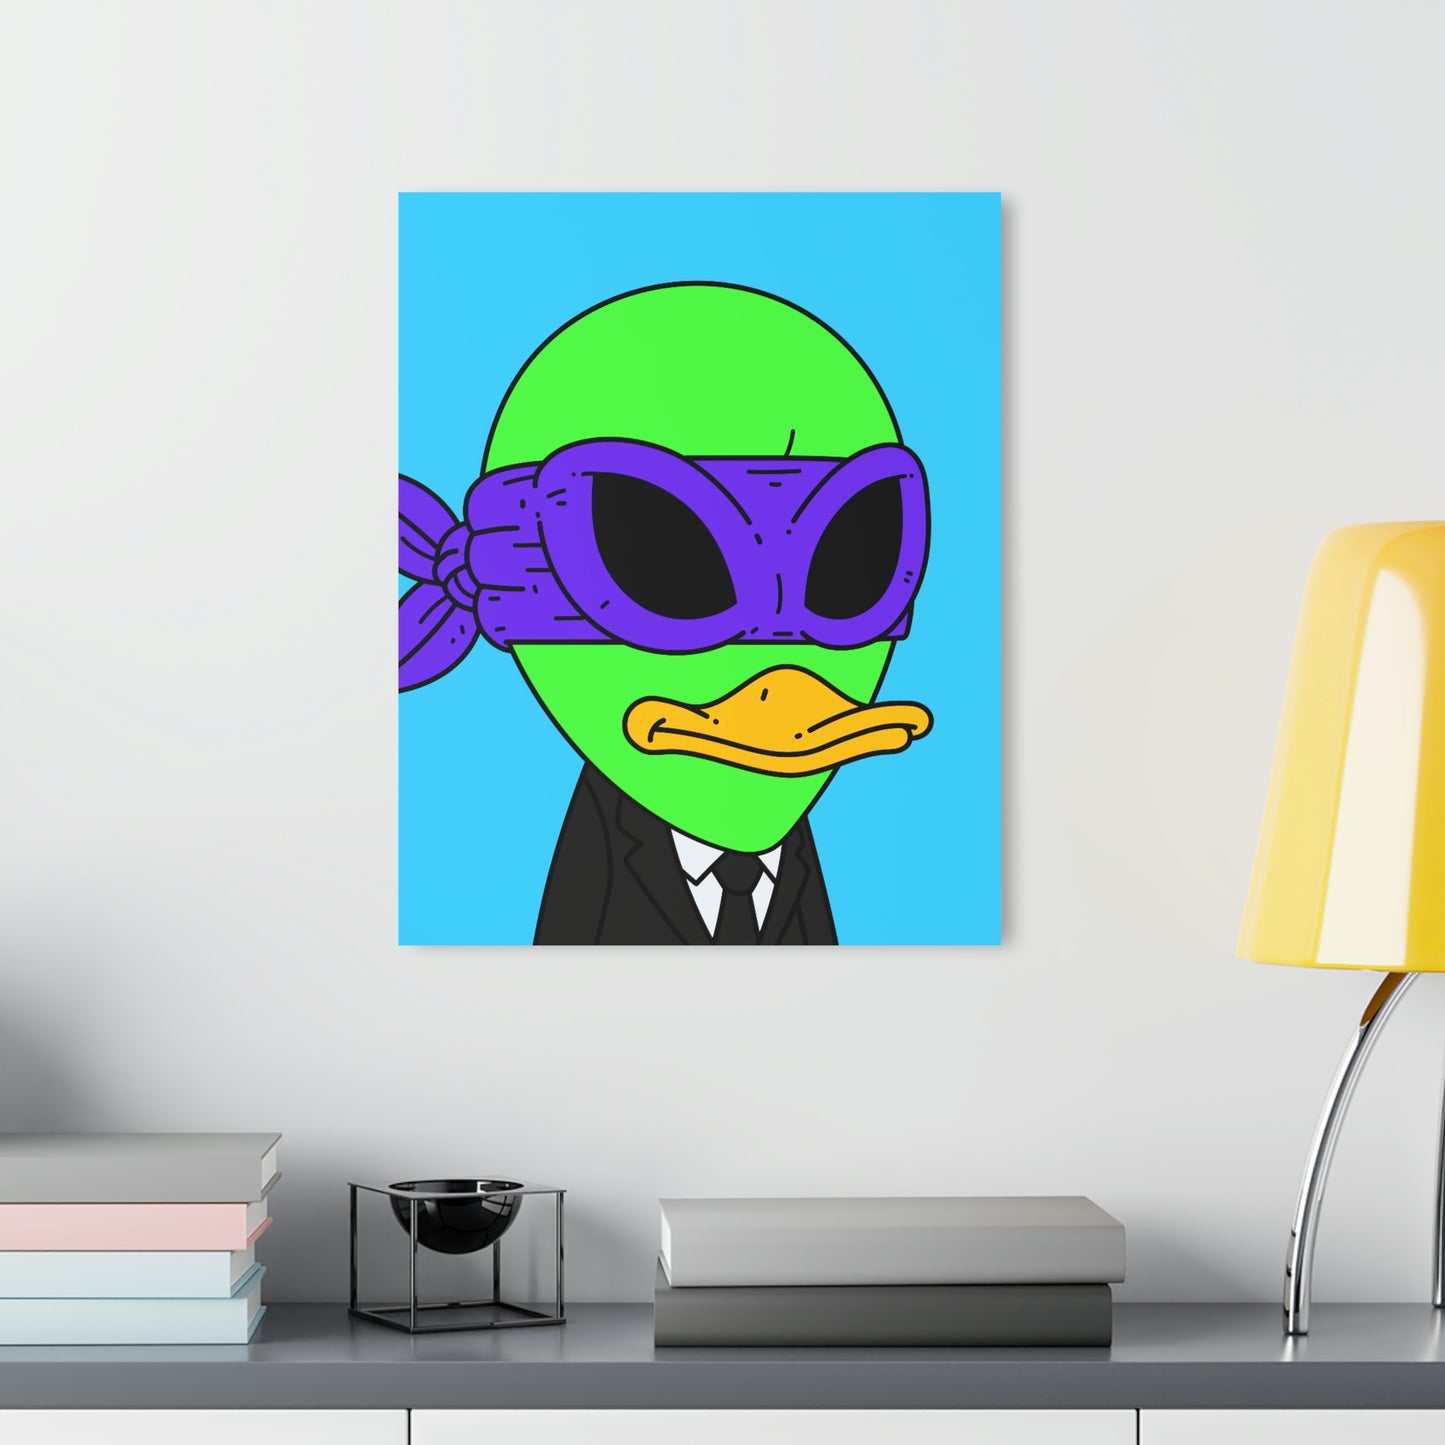 Alien Visitor 751 Acrylic Prints (French Cleat Hanging)